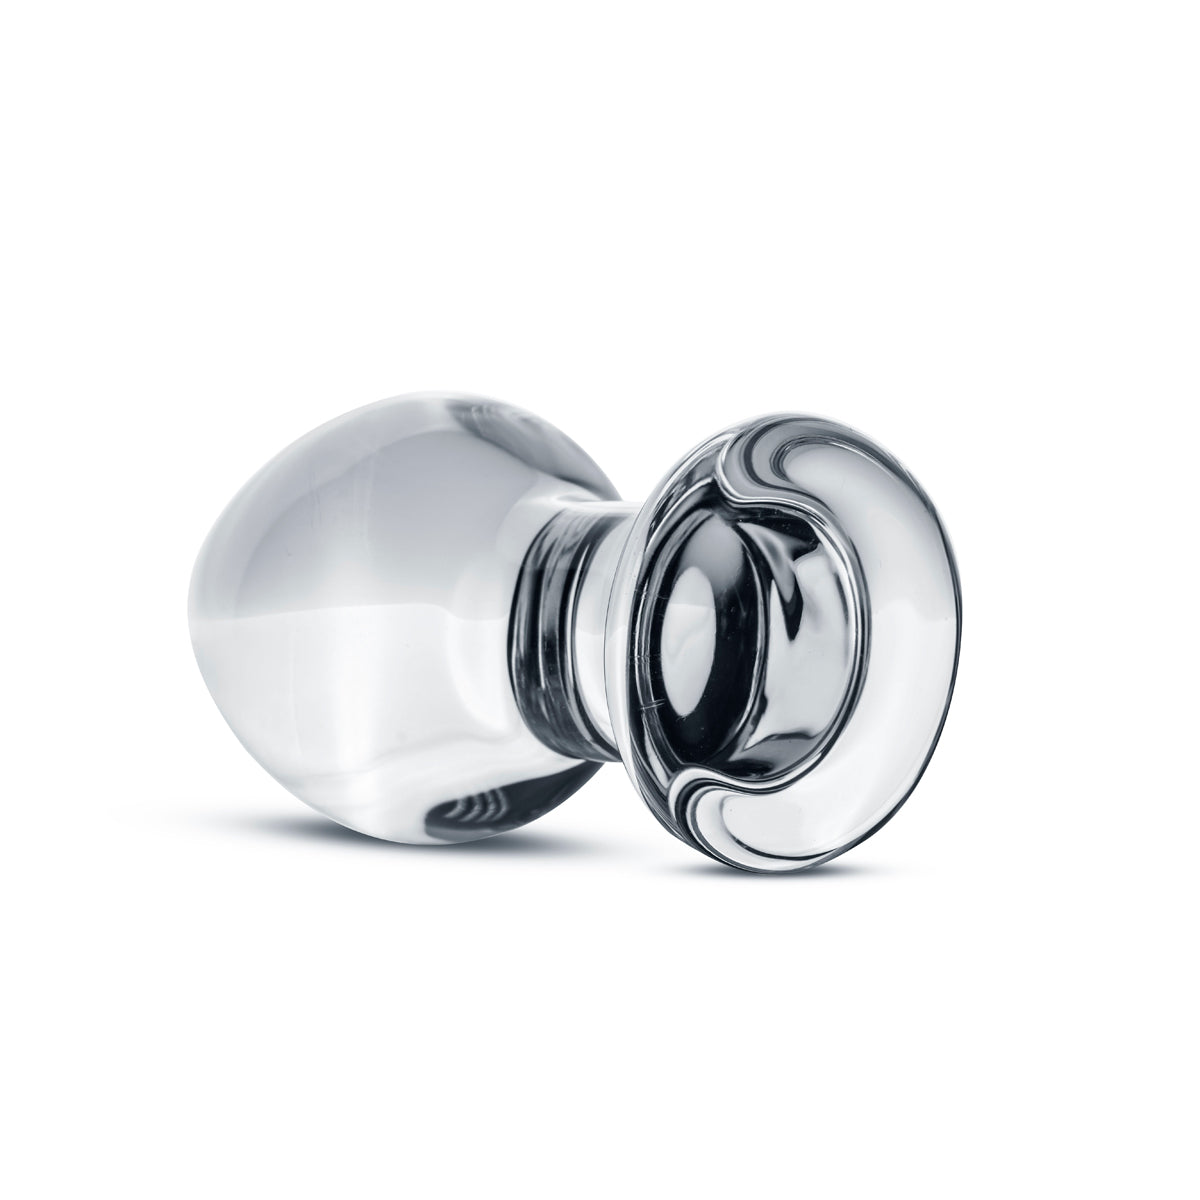 Glass Buttplug No 26 - Just for you desires